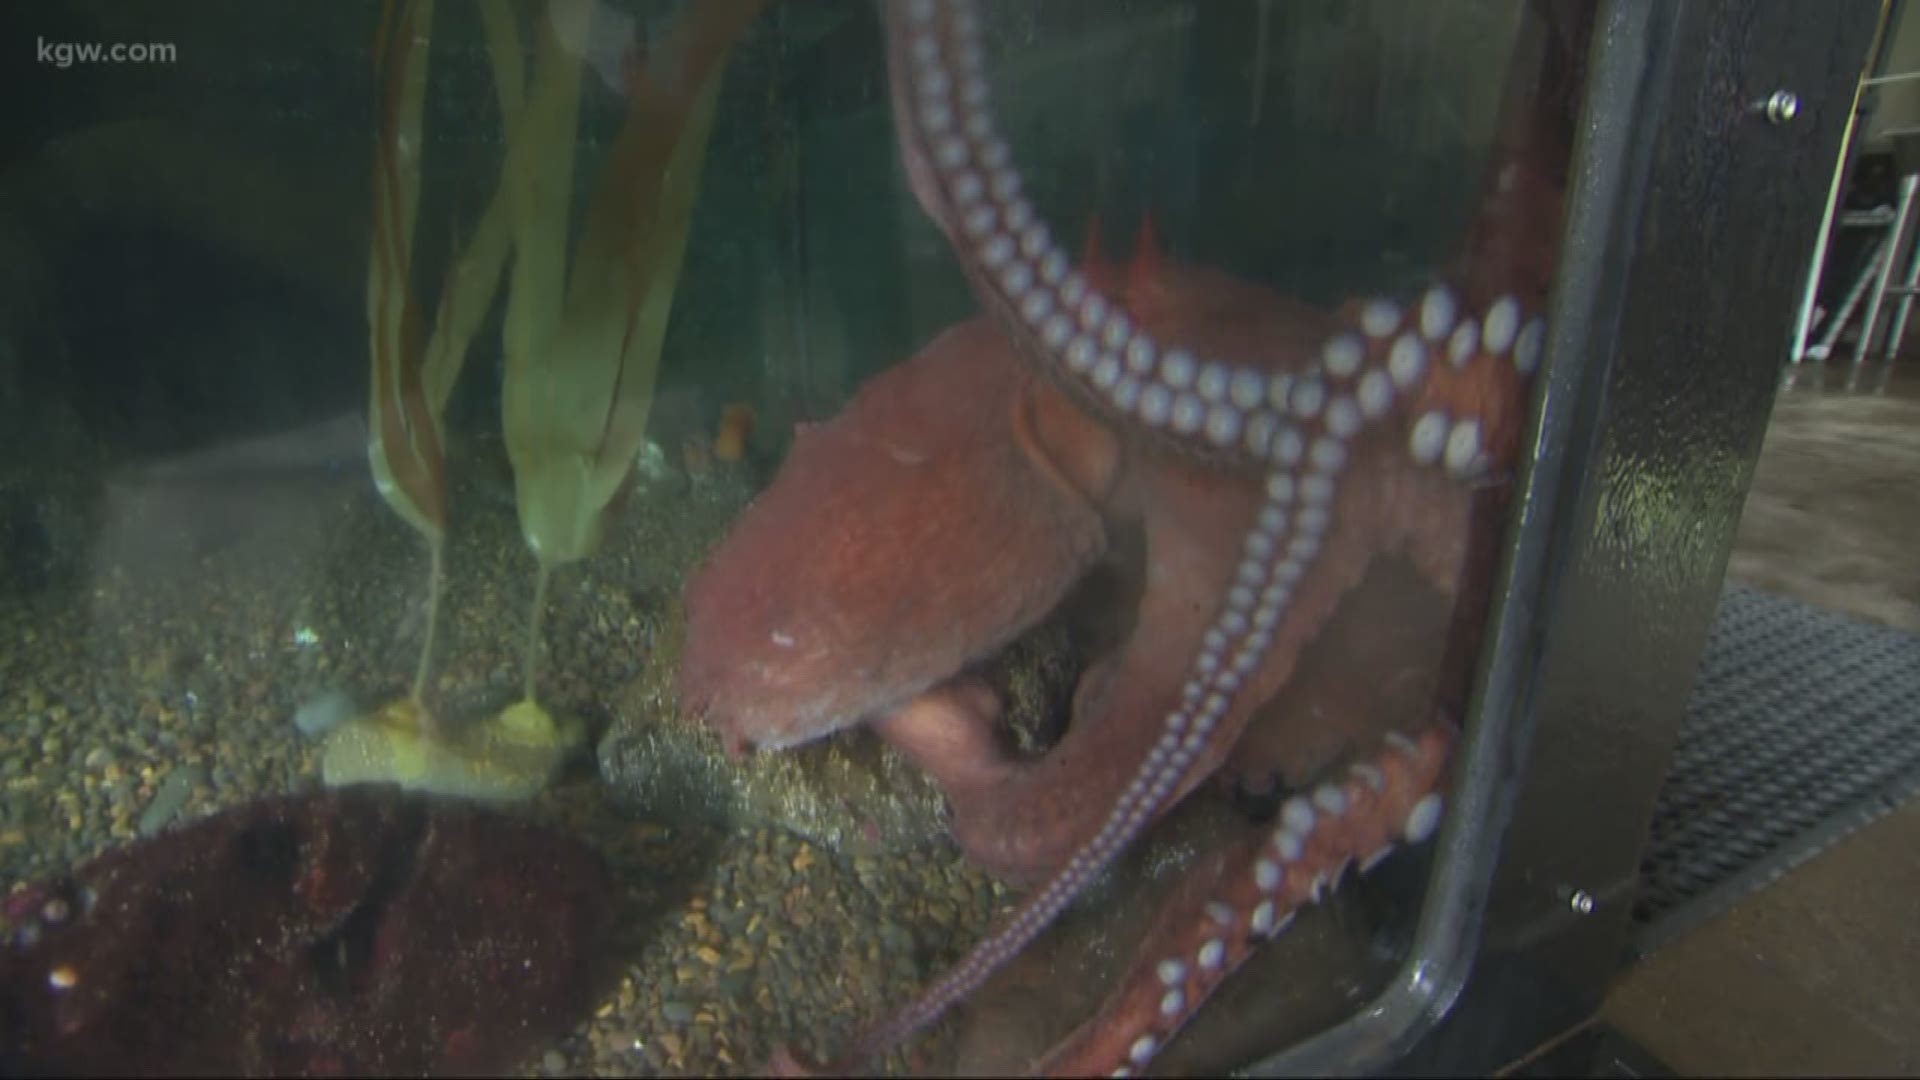 Ever been face-to-face with an octopus?